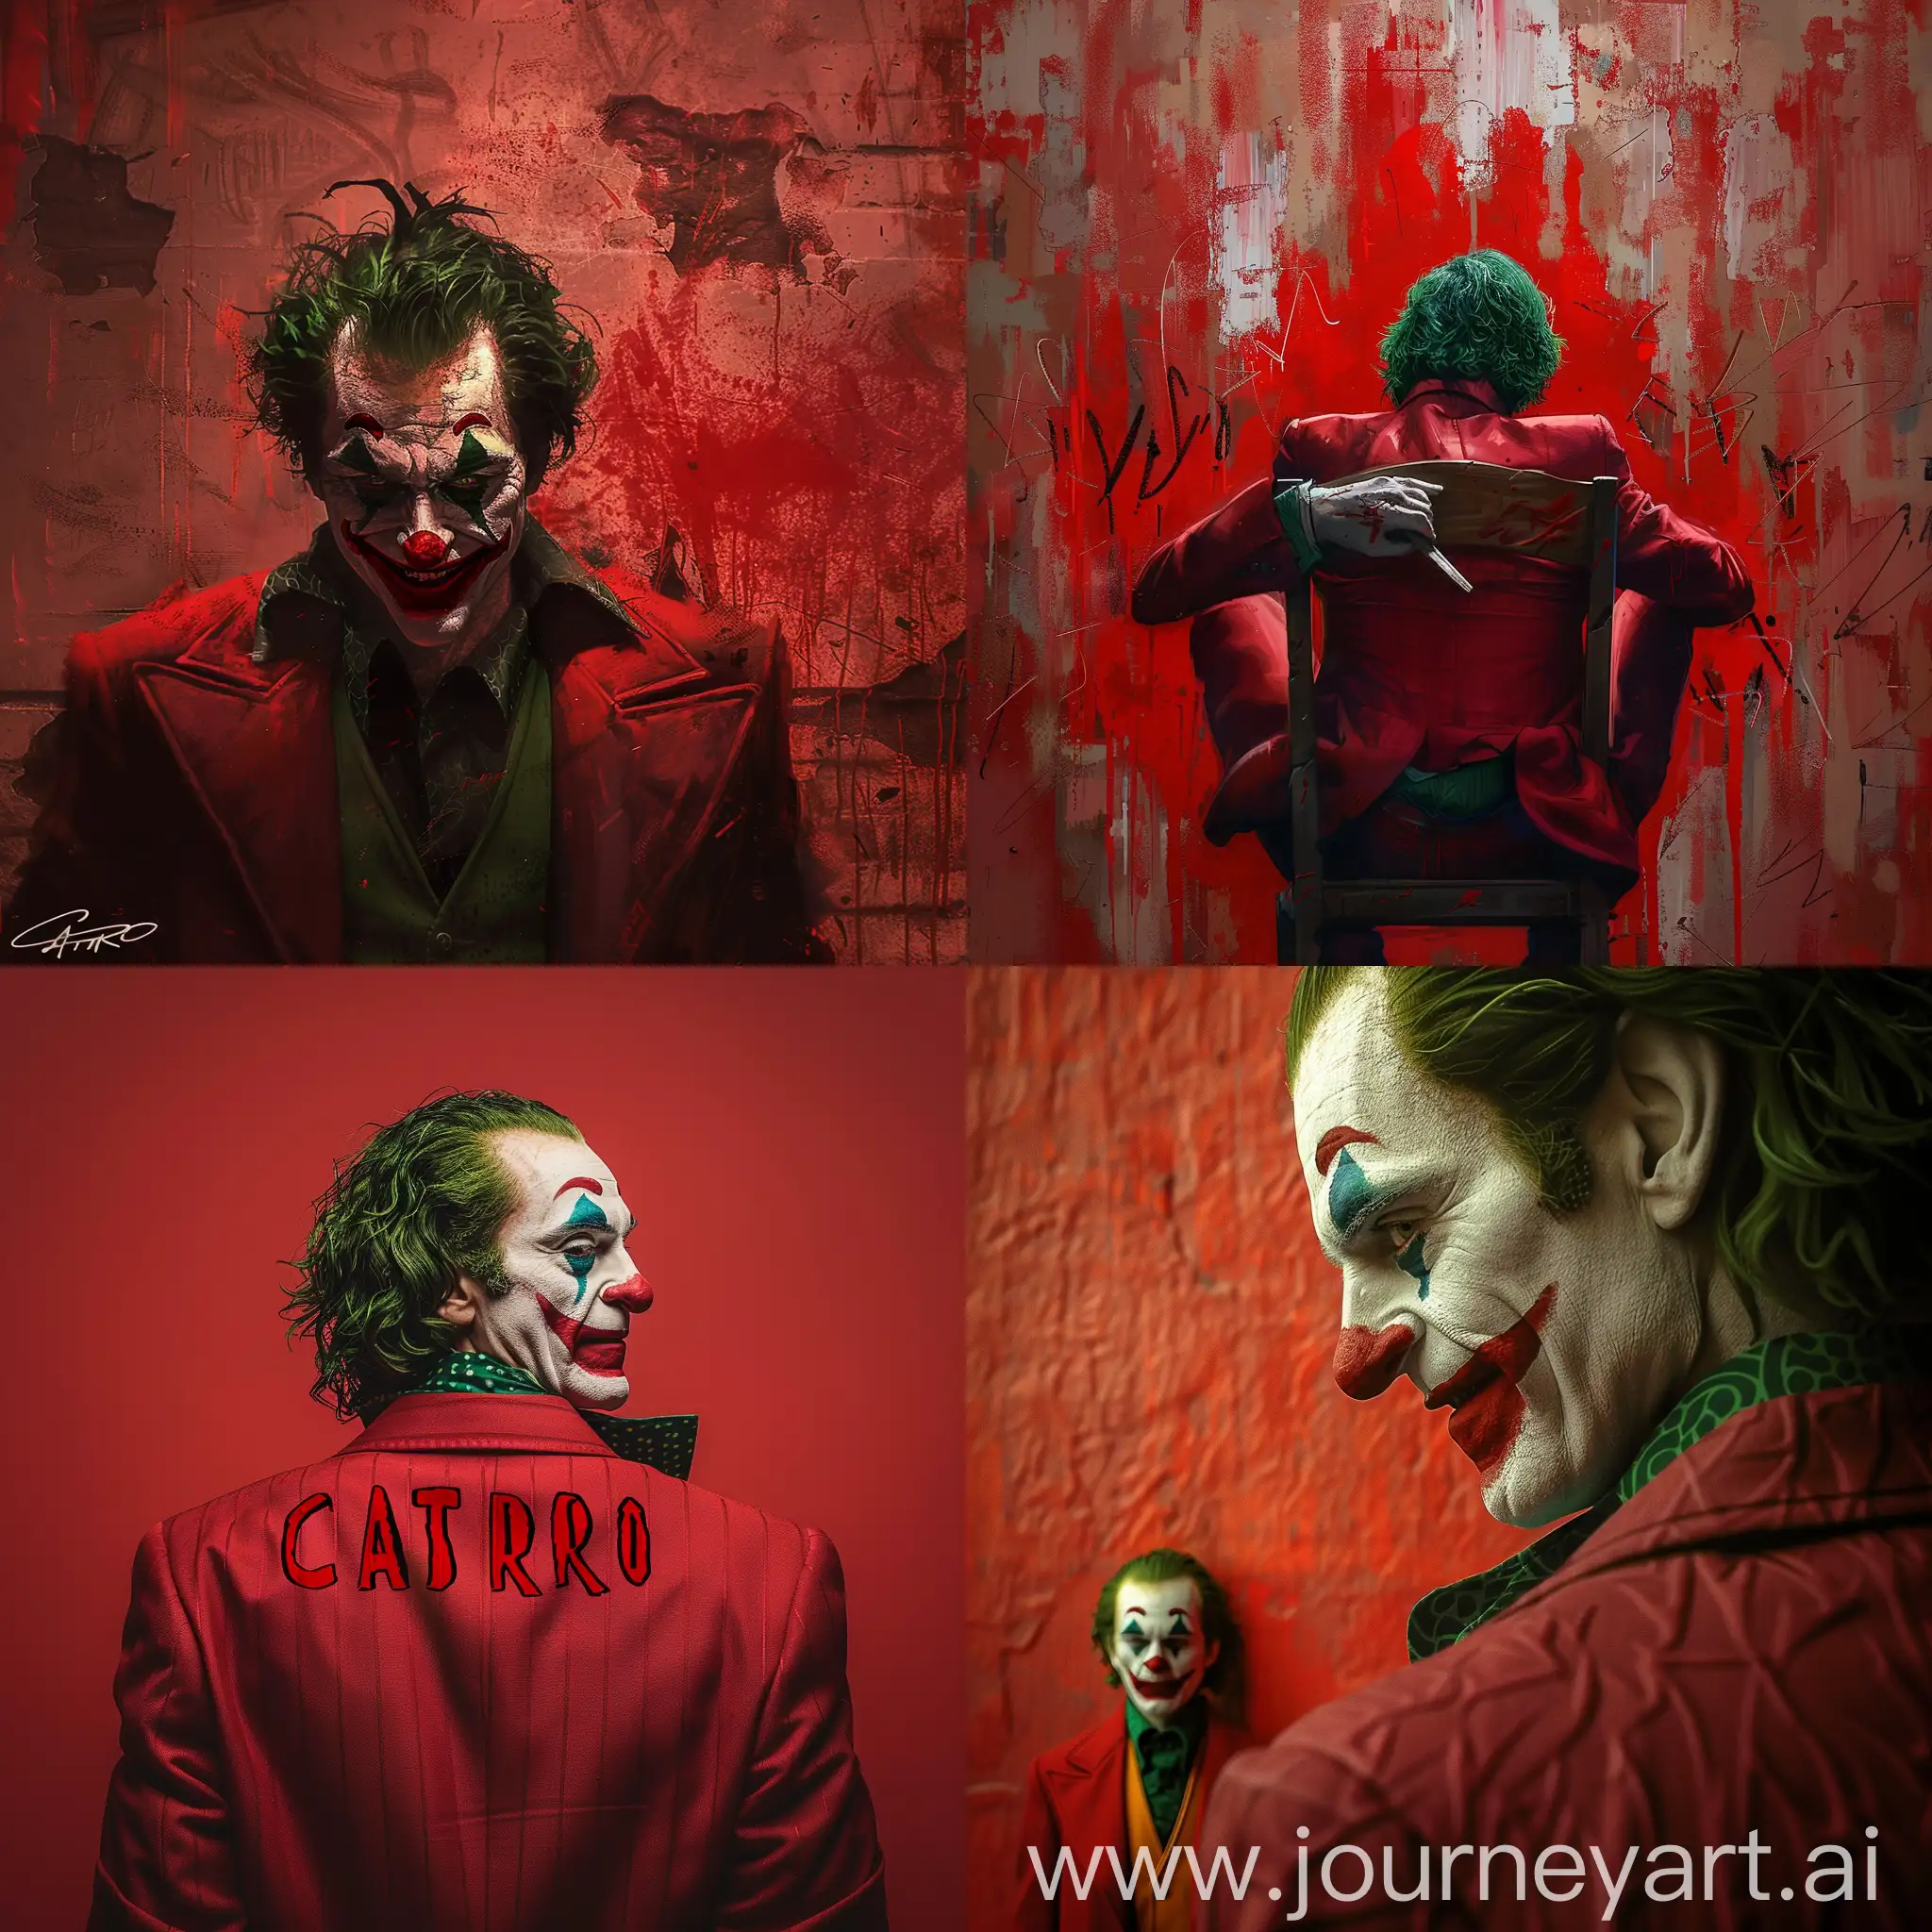 Playful-Joker-Against-Vibrant-Red-Wall-with-CastRo-Graffiti